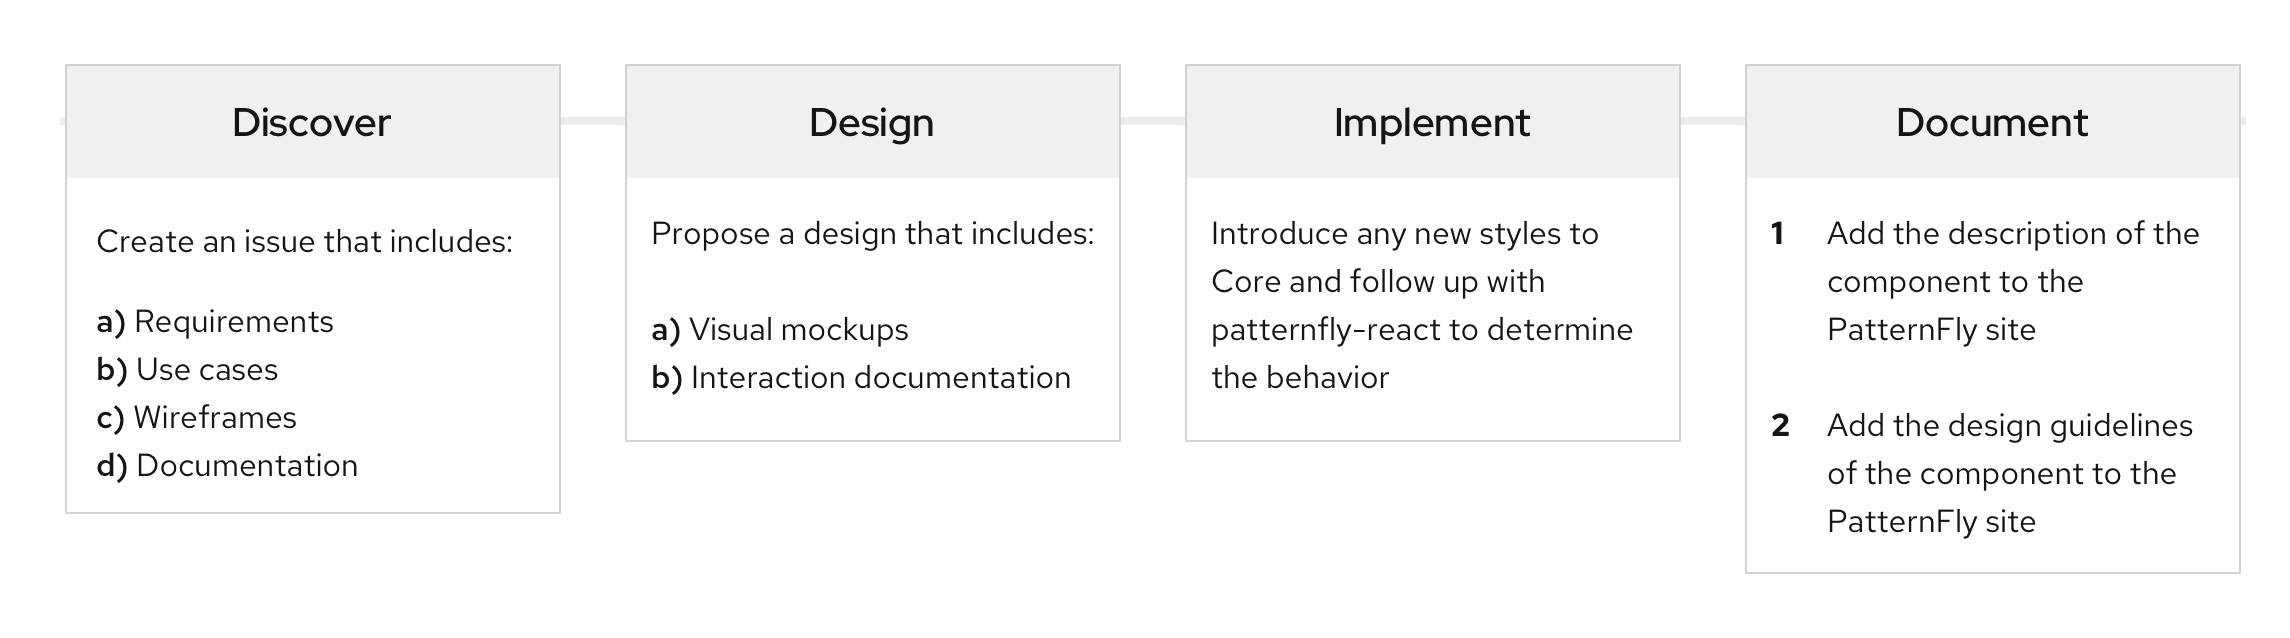 Discover, design, implement, and document are the four phases of PatternFly's feature development.